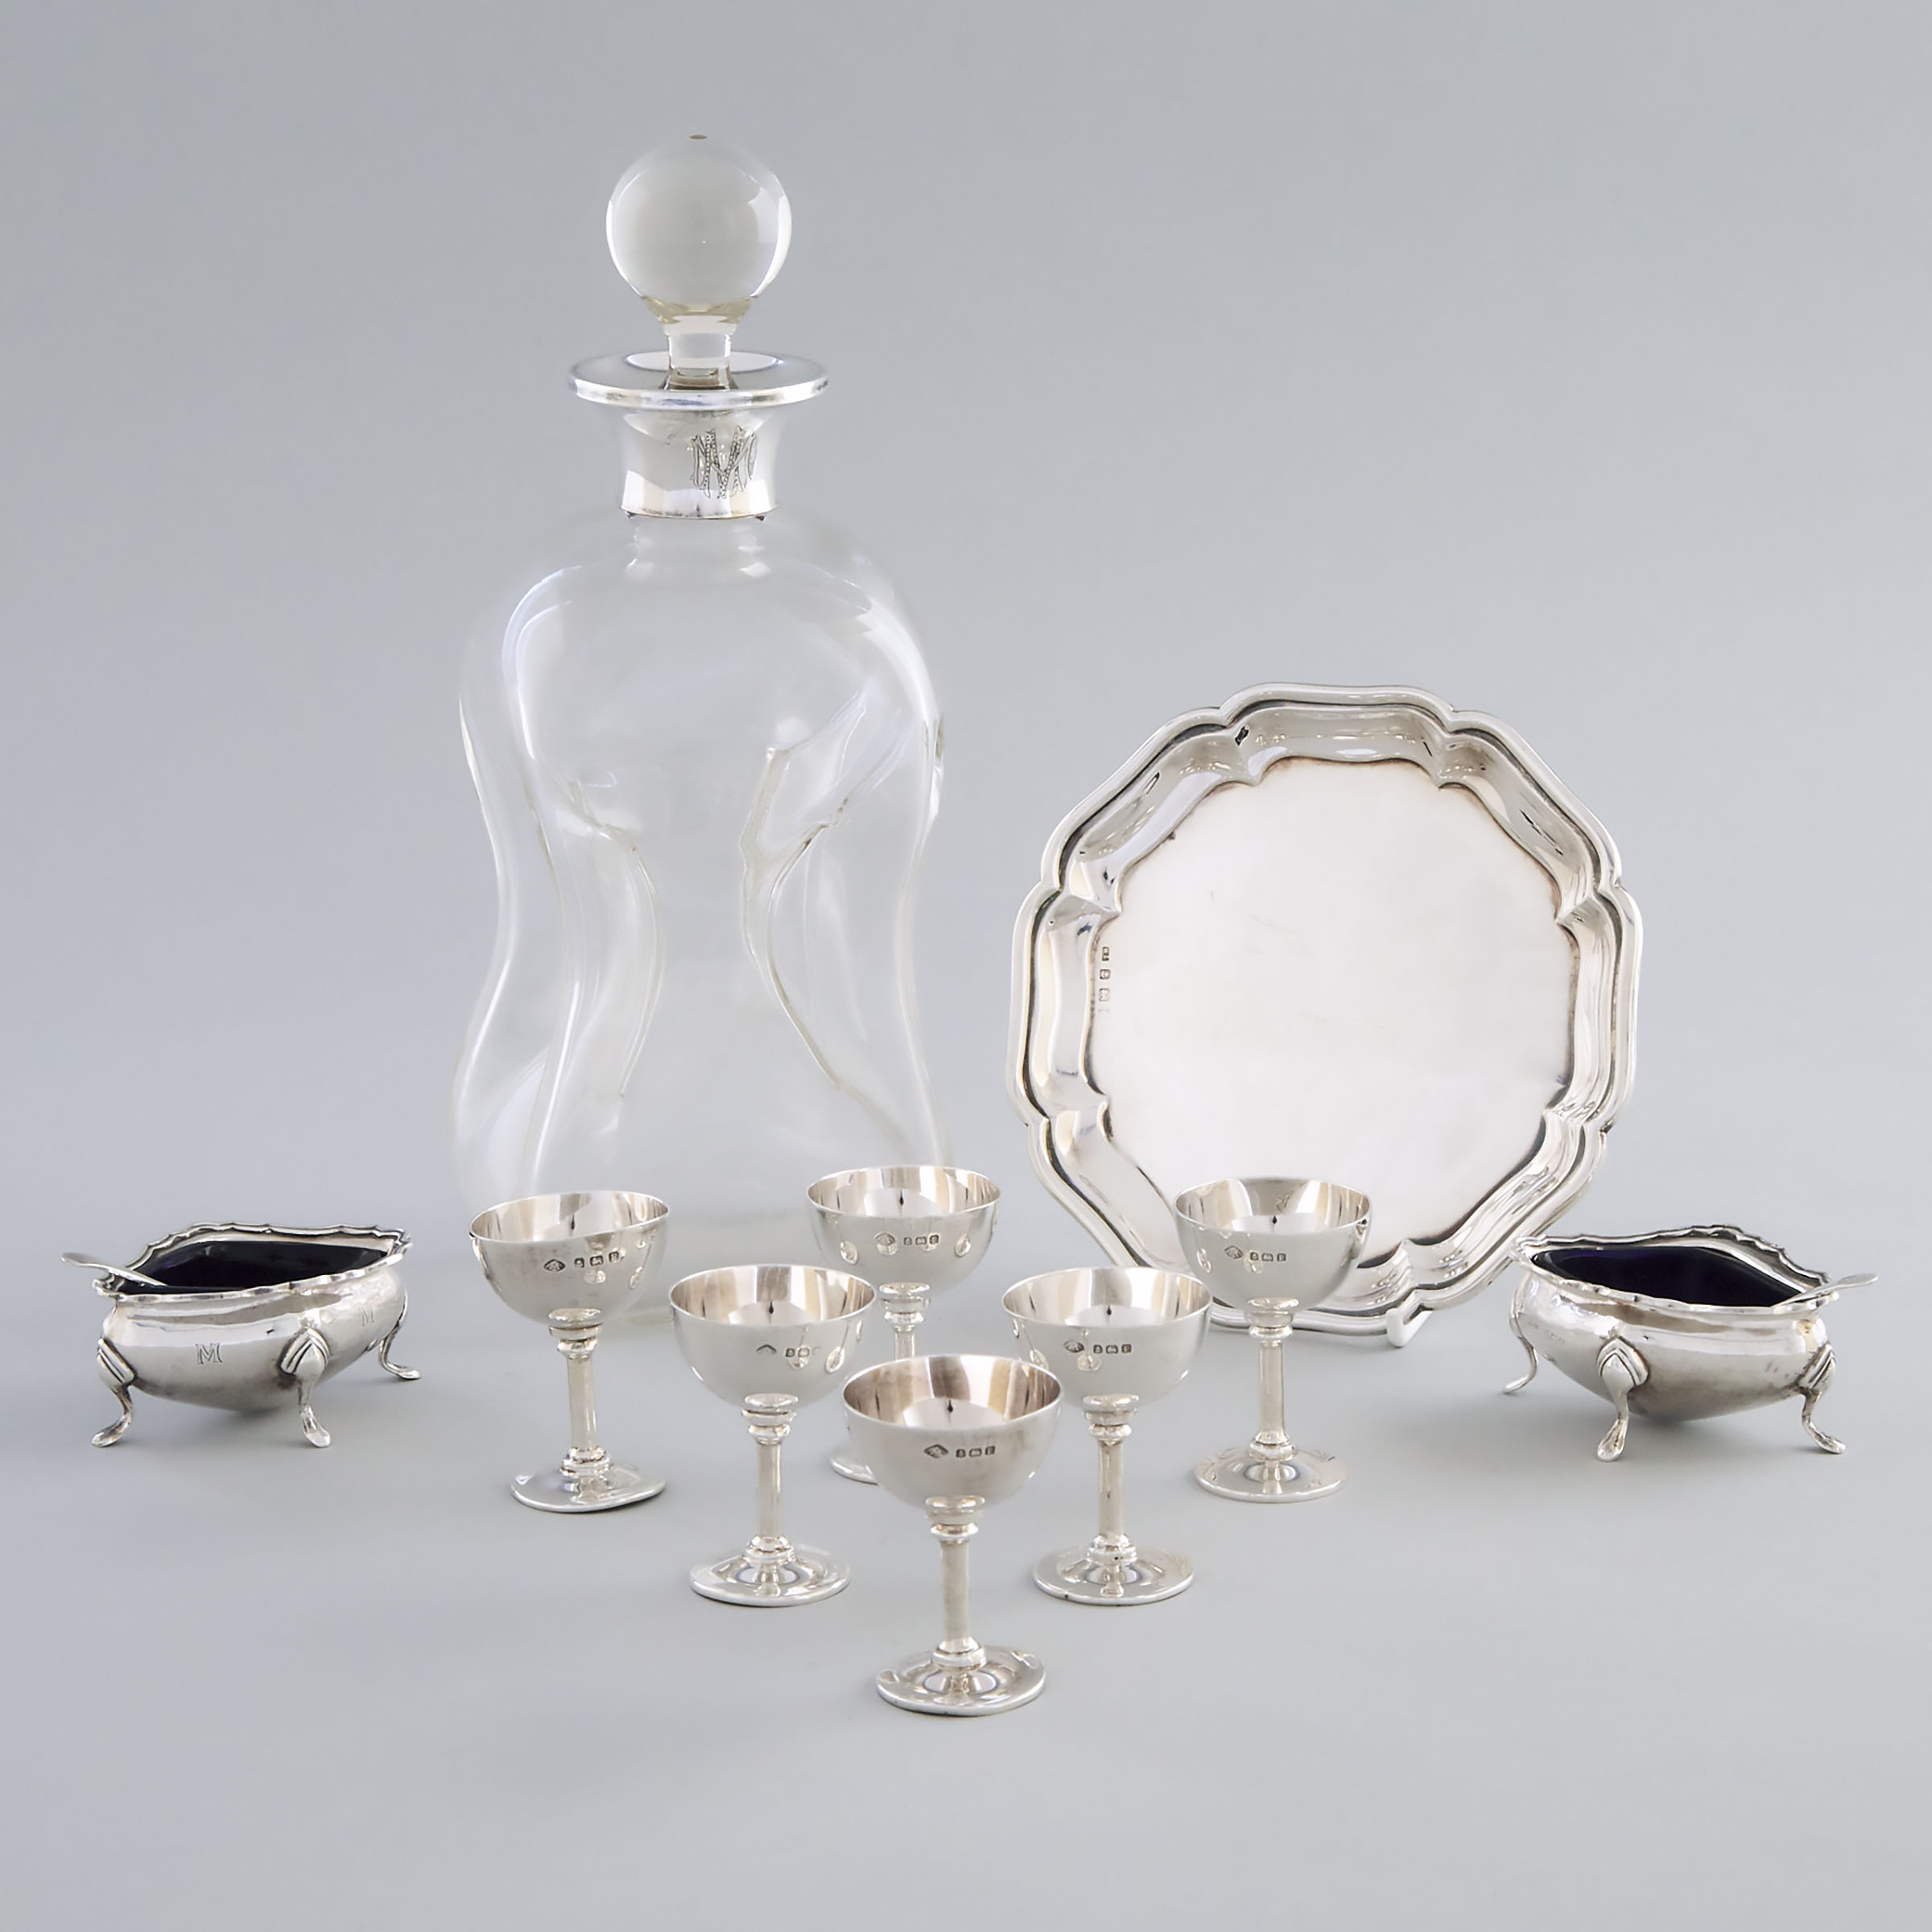 Group of English Silver, Birmingham and Sheffield, 1921-30